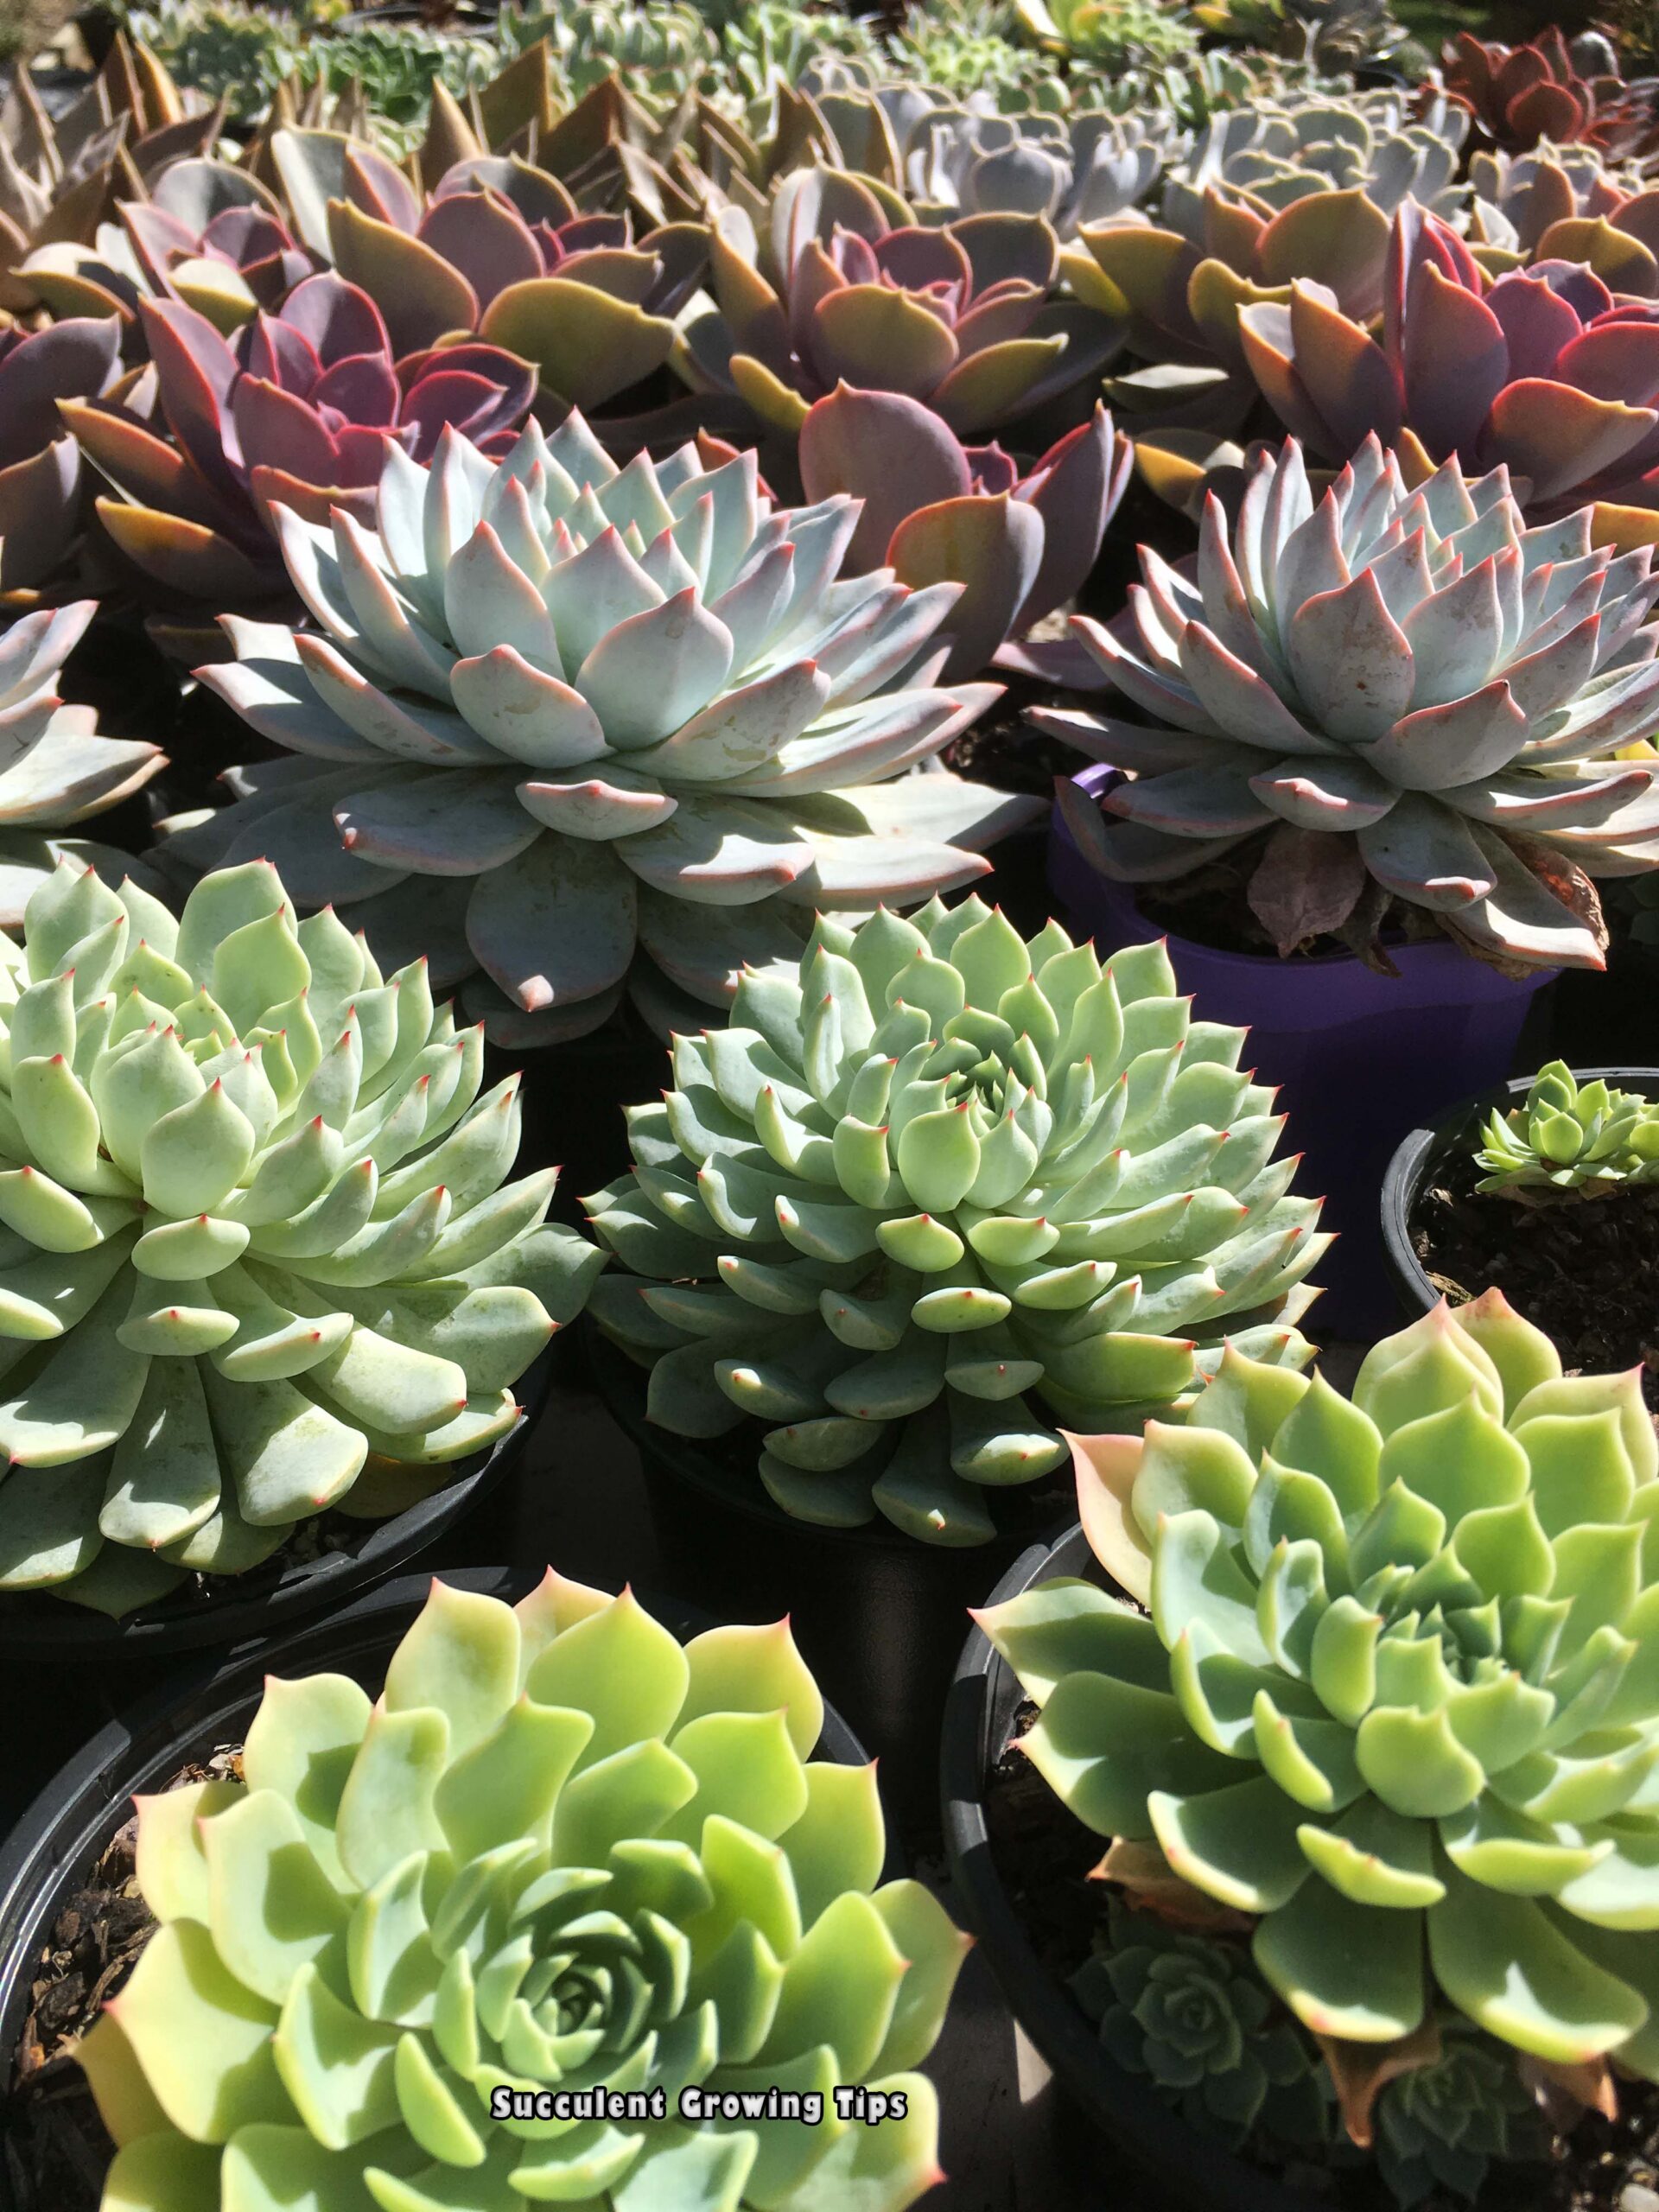 Can Succulents Die From Too Much Sun?